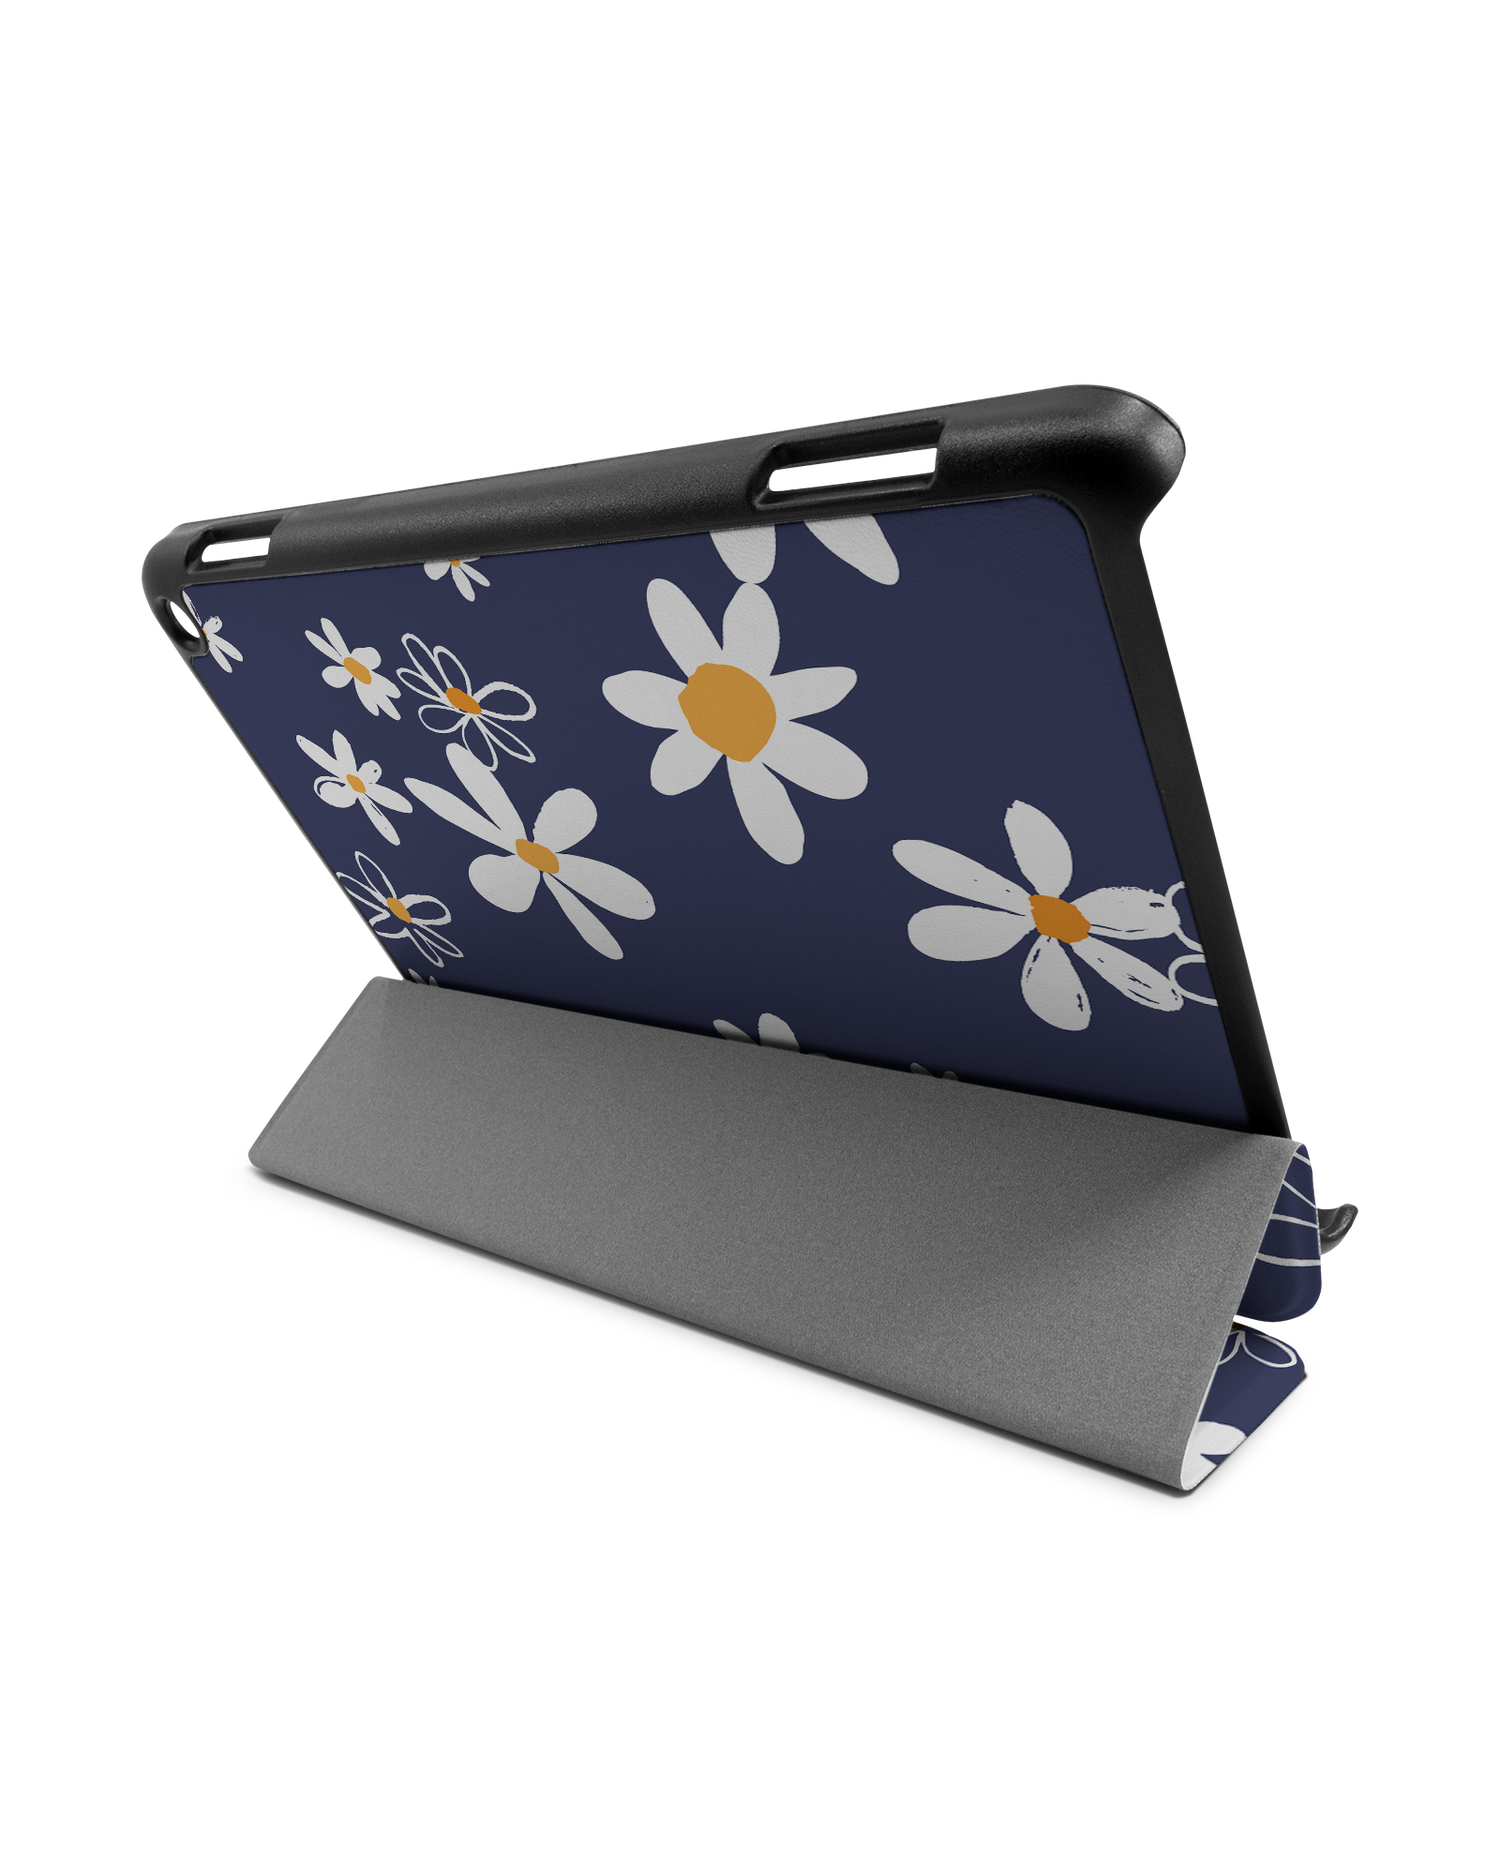 Navy Daisies Tablet Smart Case for Amazon Fire HD 8 (2022), Amazon Fire HD 8 Plus (2022), Amazon Fire HD 8 (2020), Amazon Fire HD 8 Plus (2020): Used as Stand